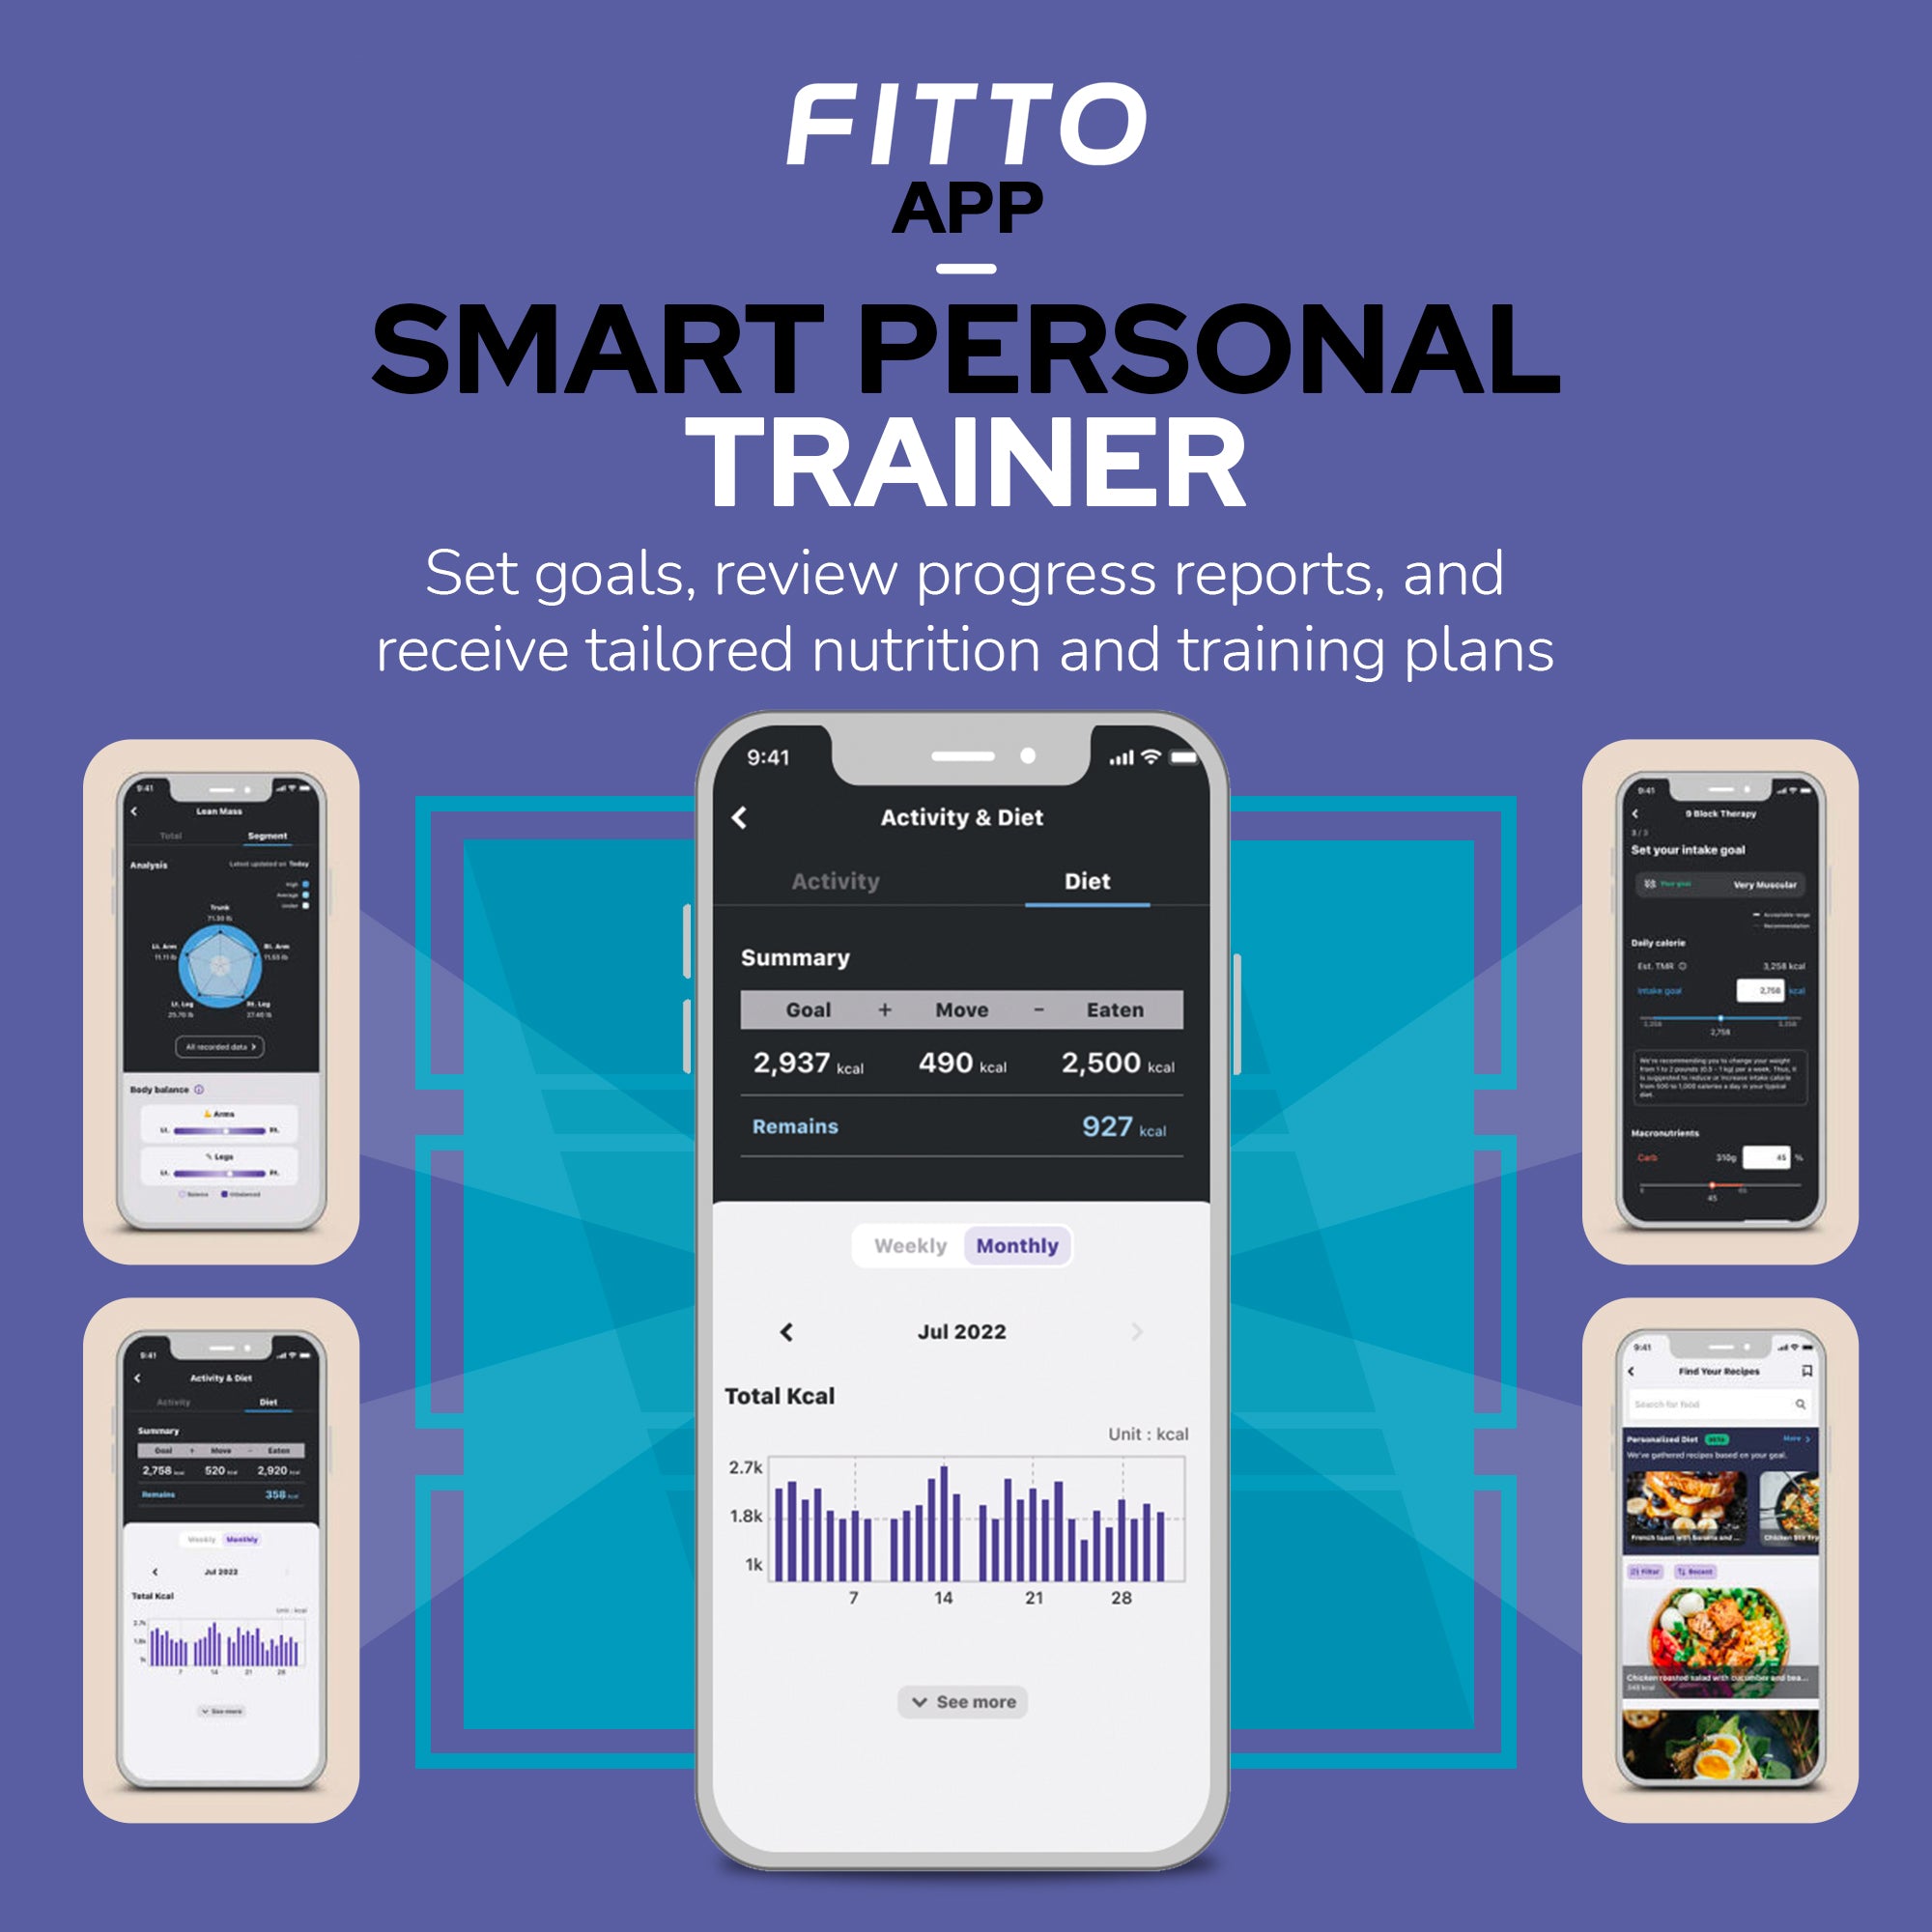 FITTO : Find Your Own Power